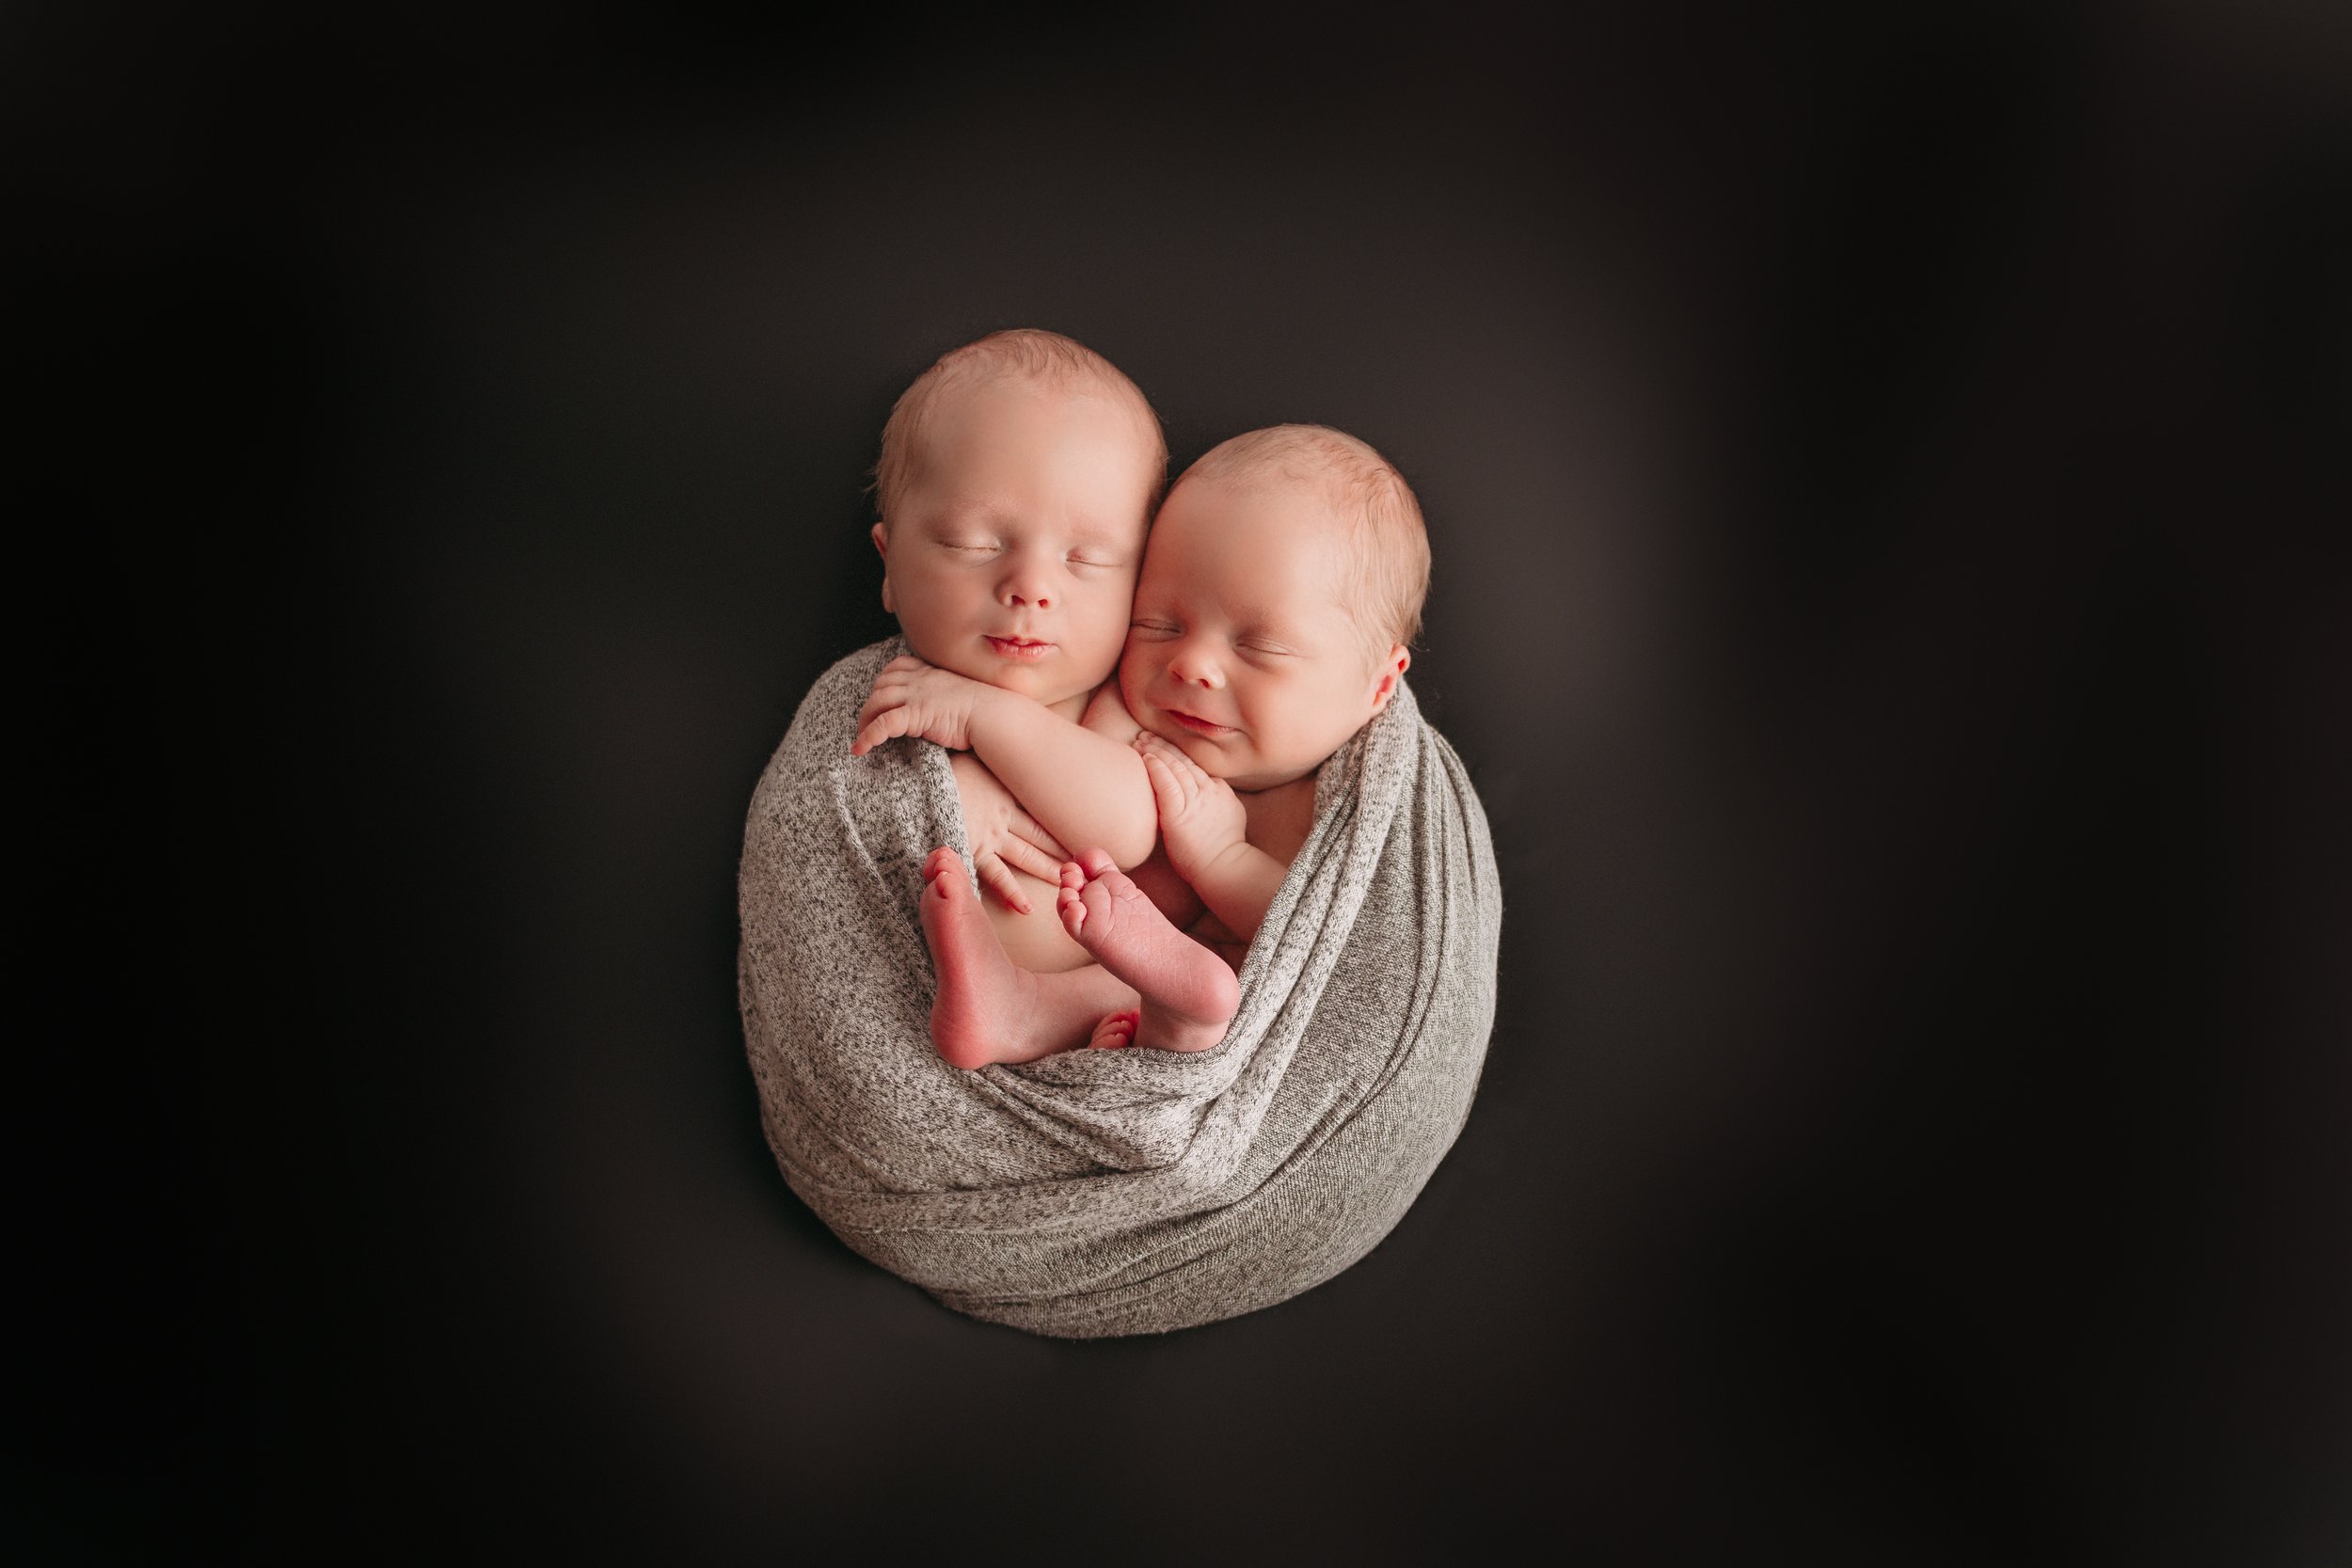 Newborn twins wrapped together